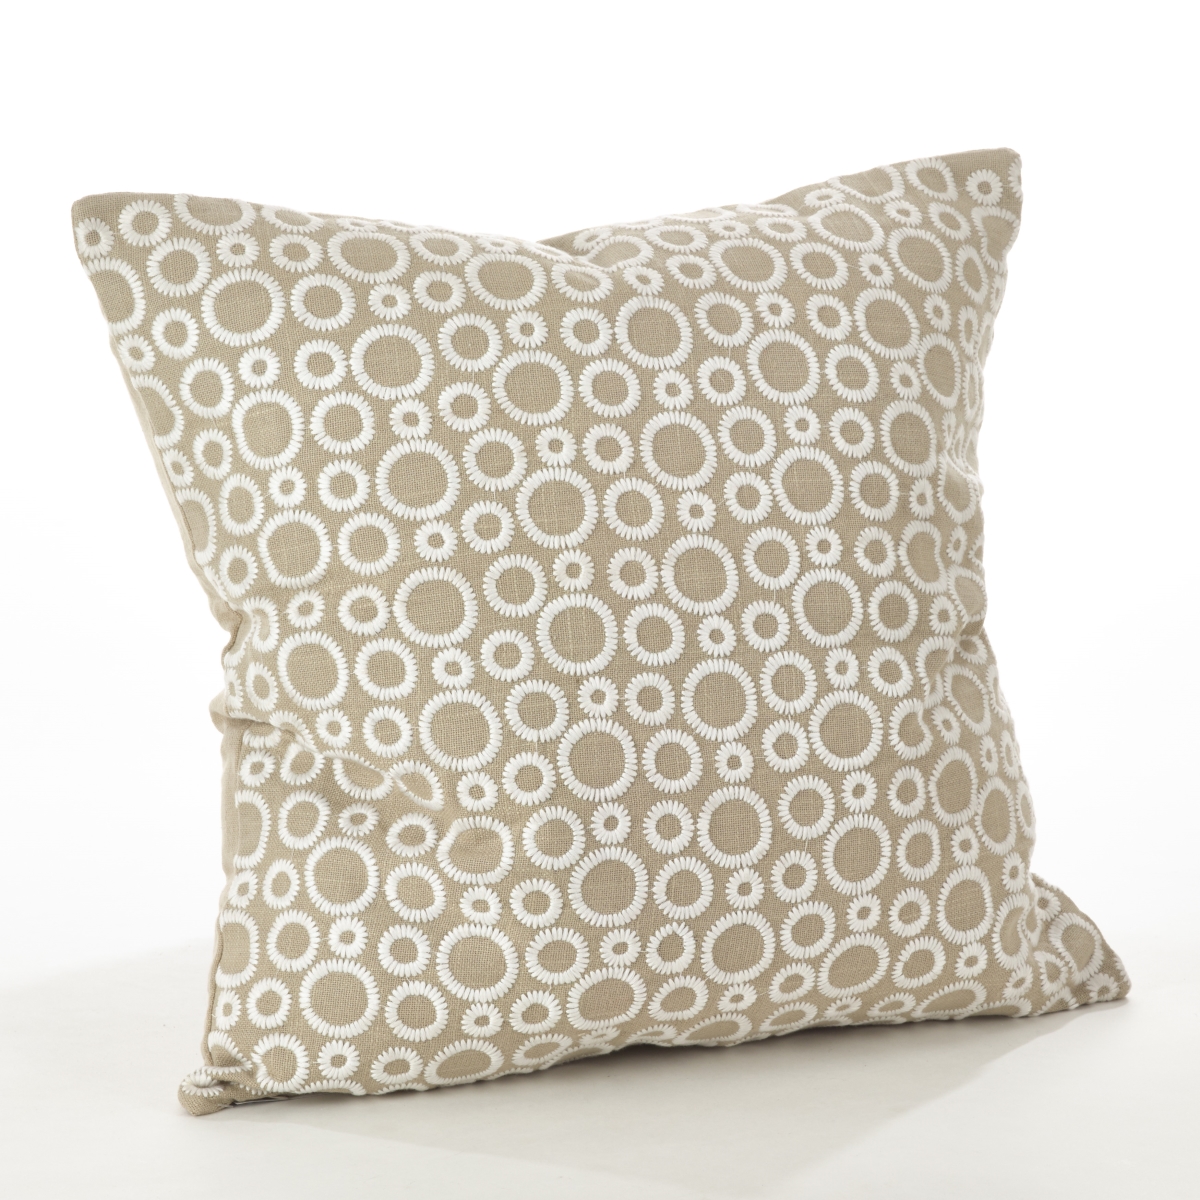 0007.n20s 20 In. Embroidered Design Down Filled Cotton Throw Pillow, Natural